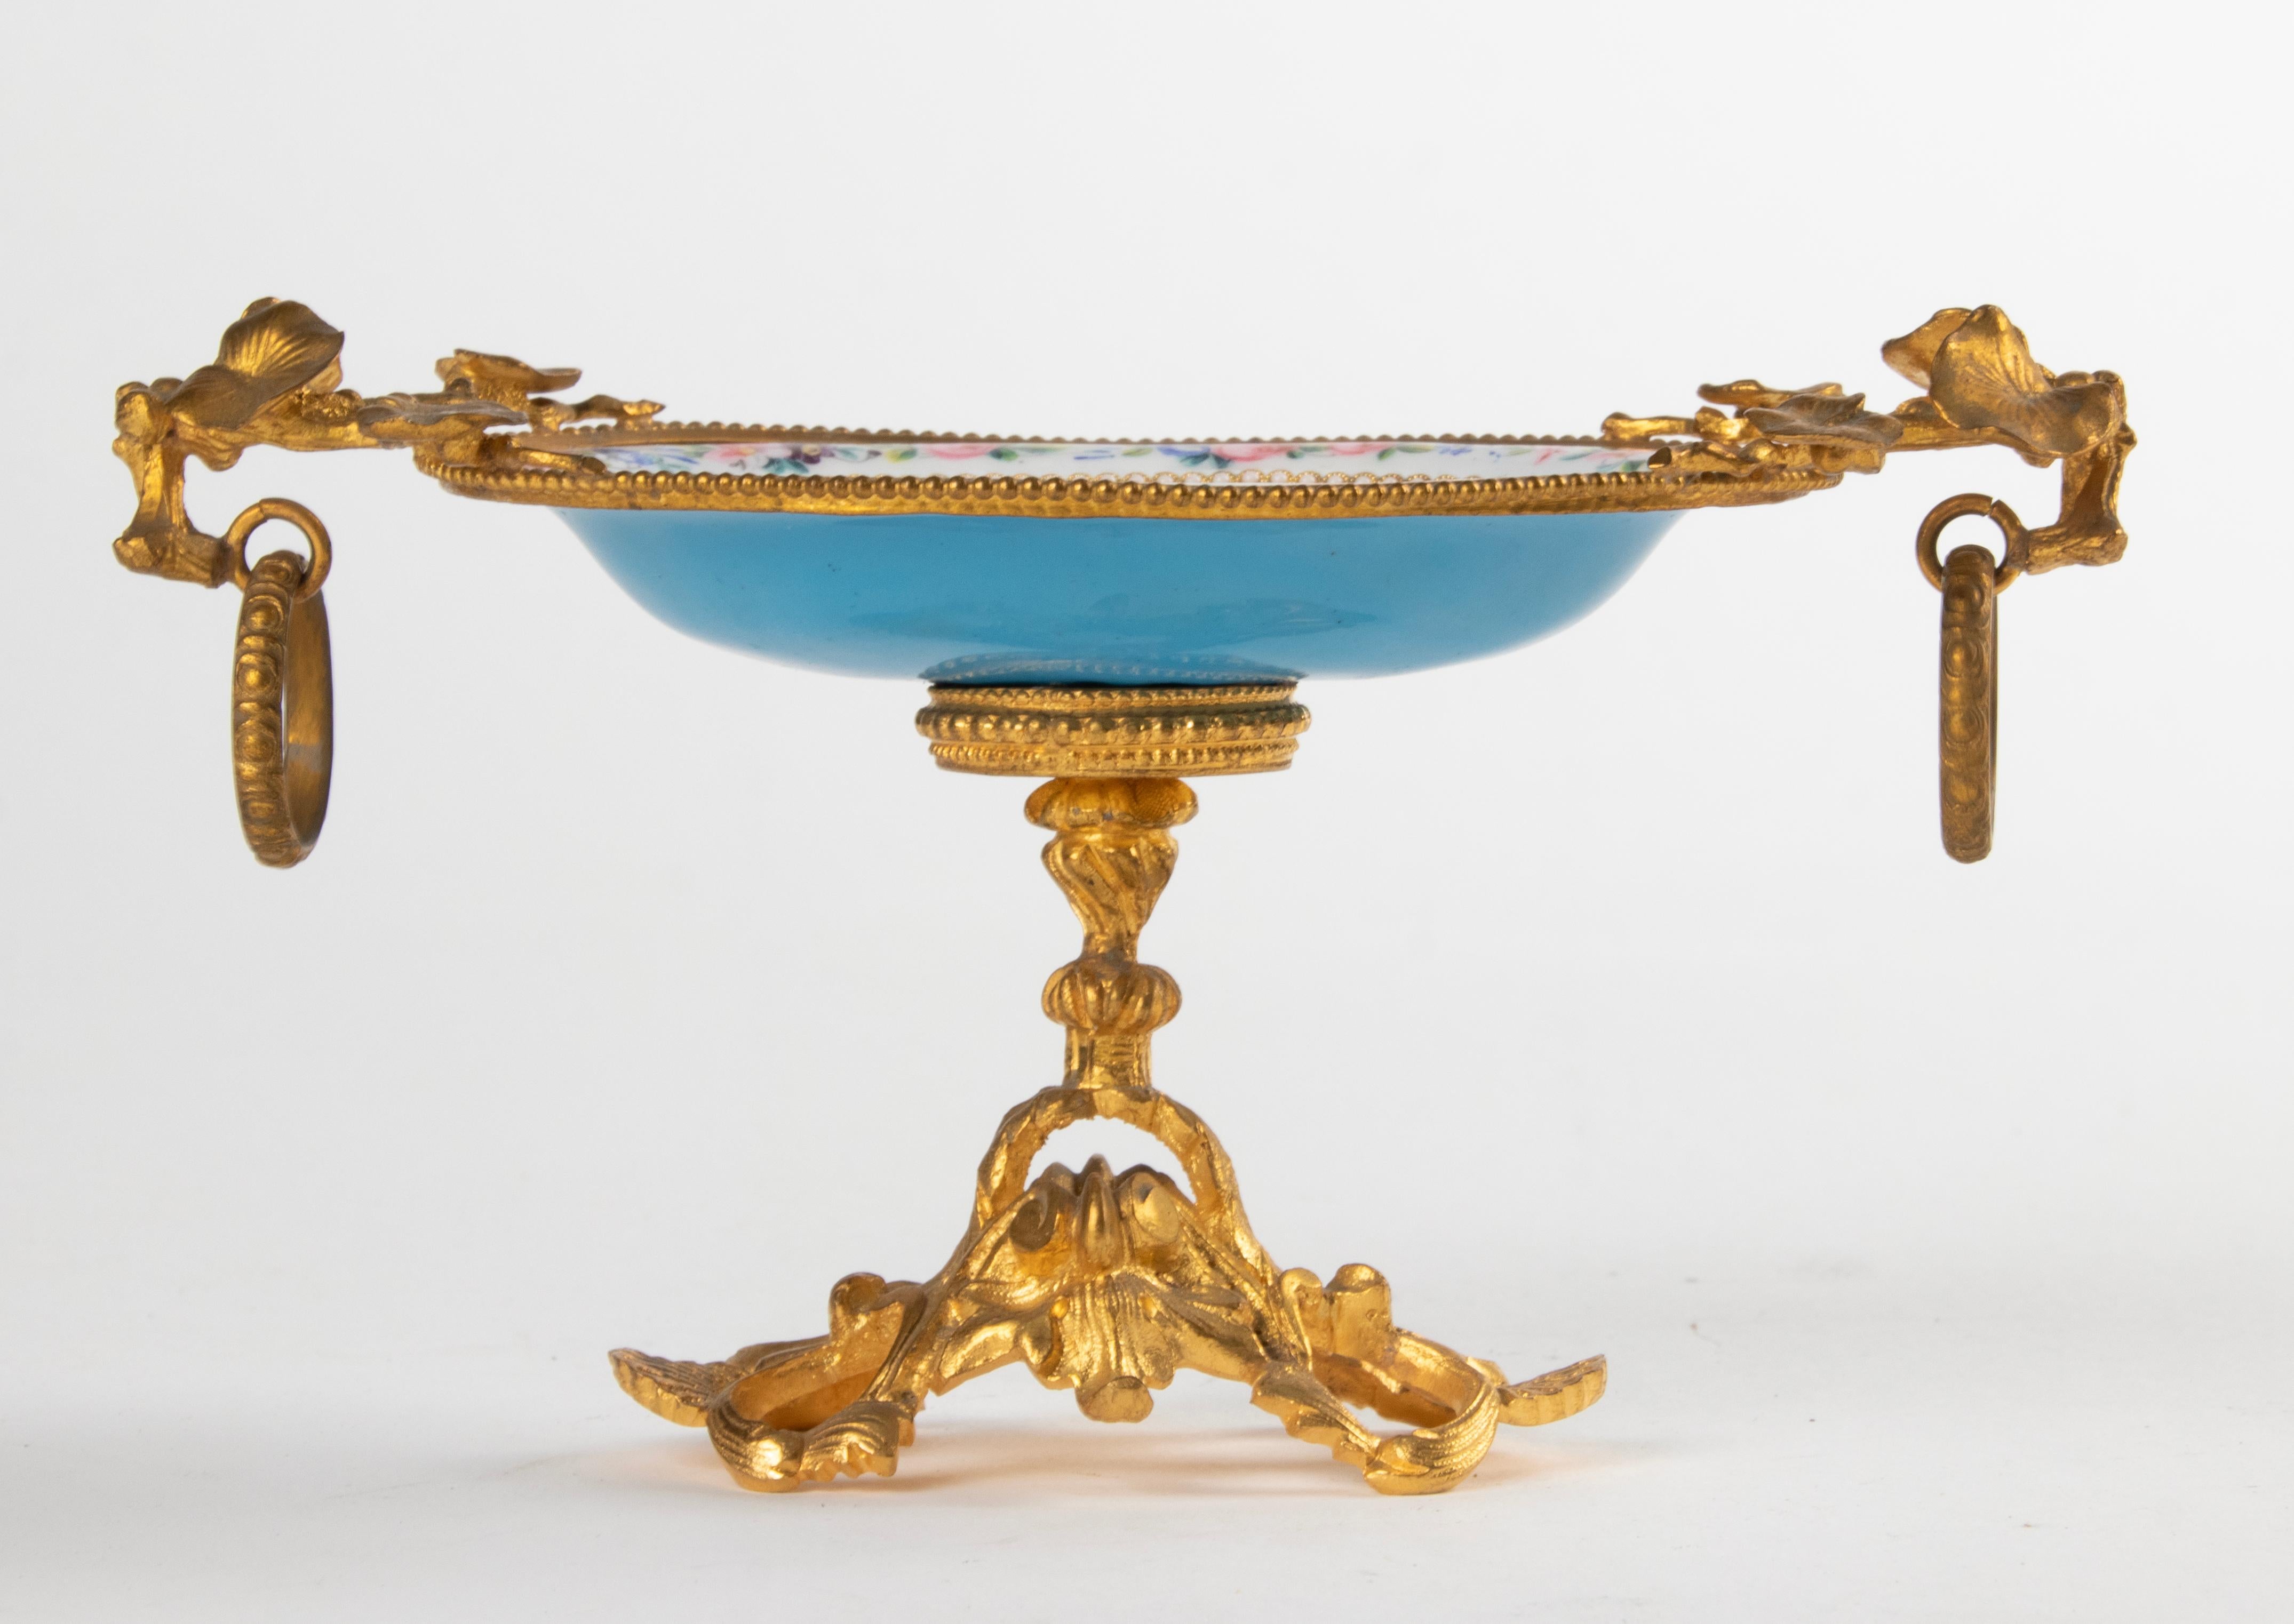 Elegant small footed dish. Made of gilded bronze and enamel, hand painted. In good condition. 